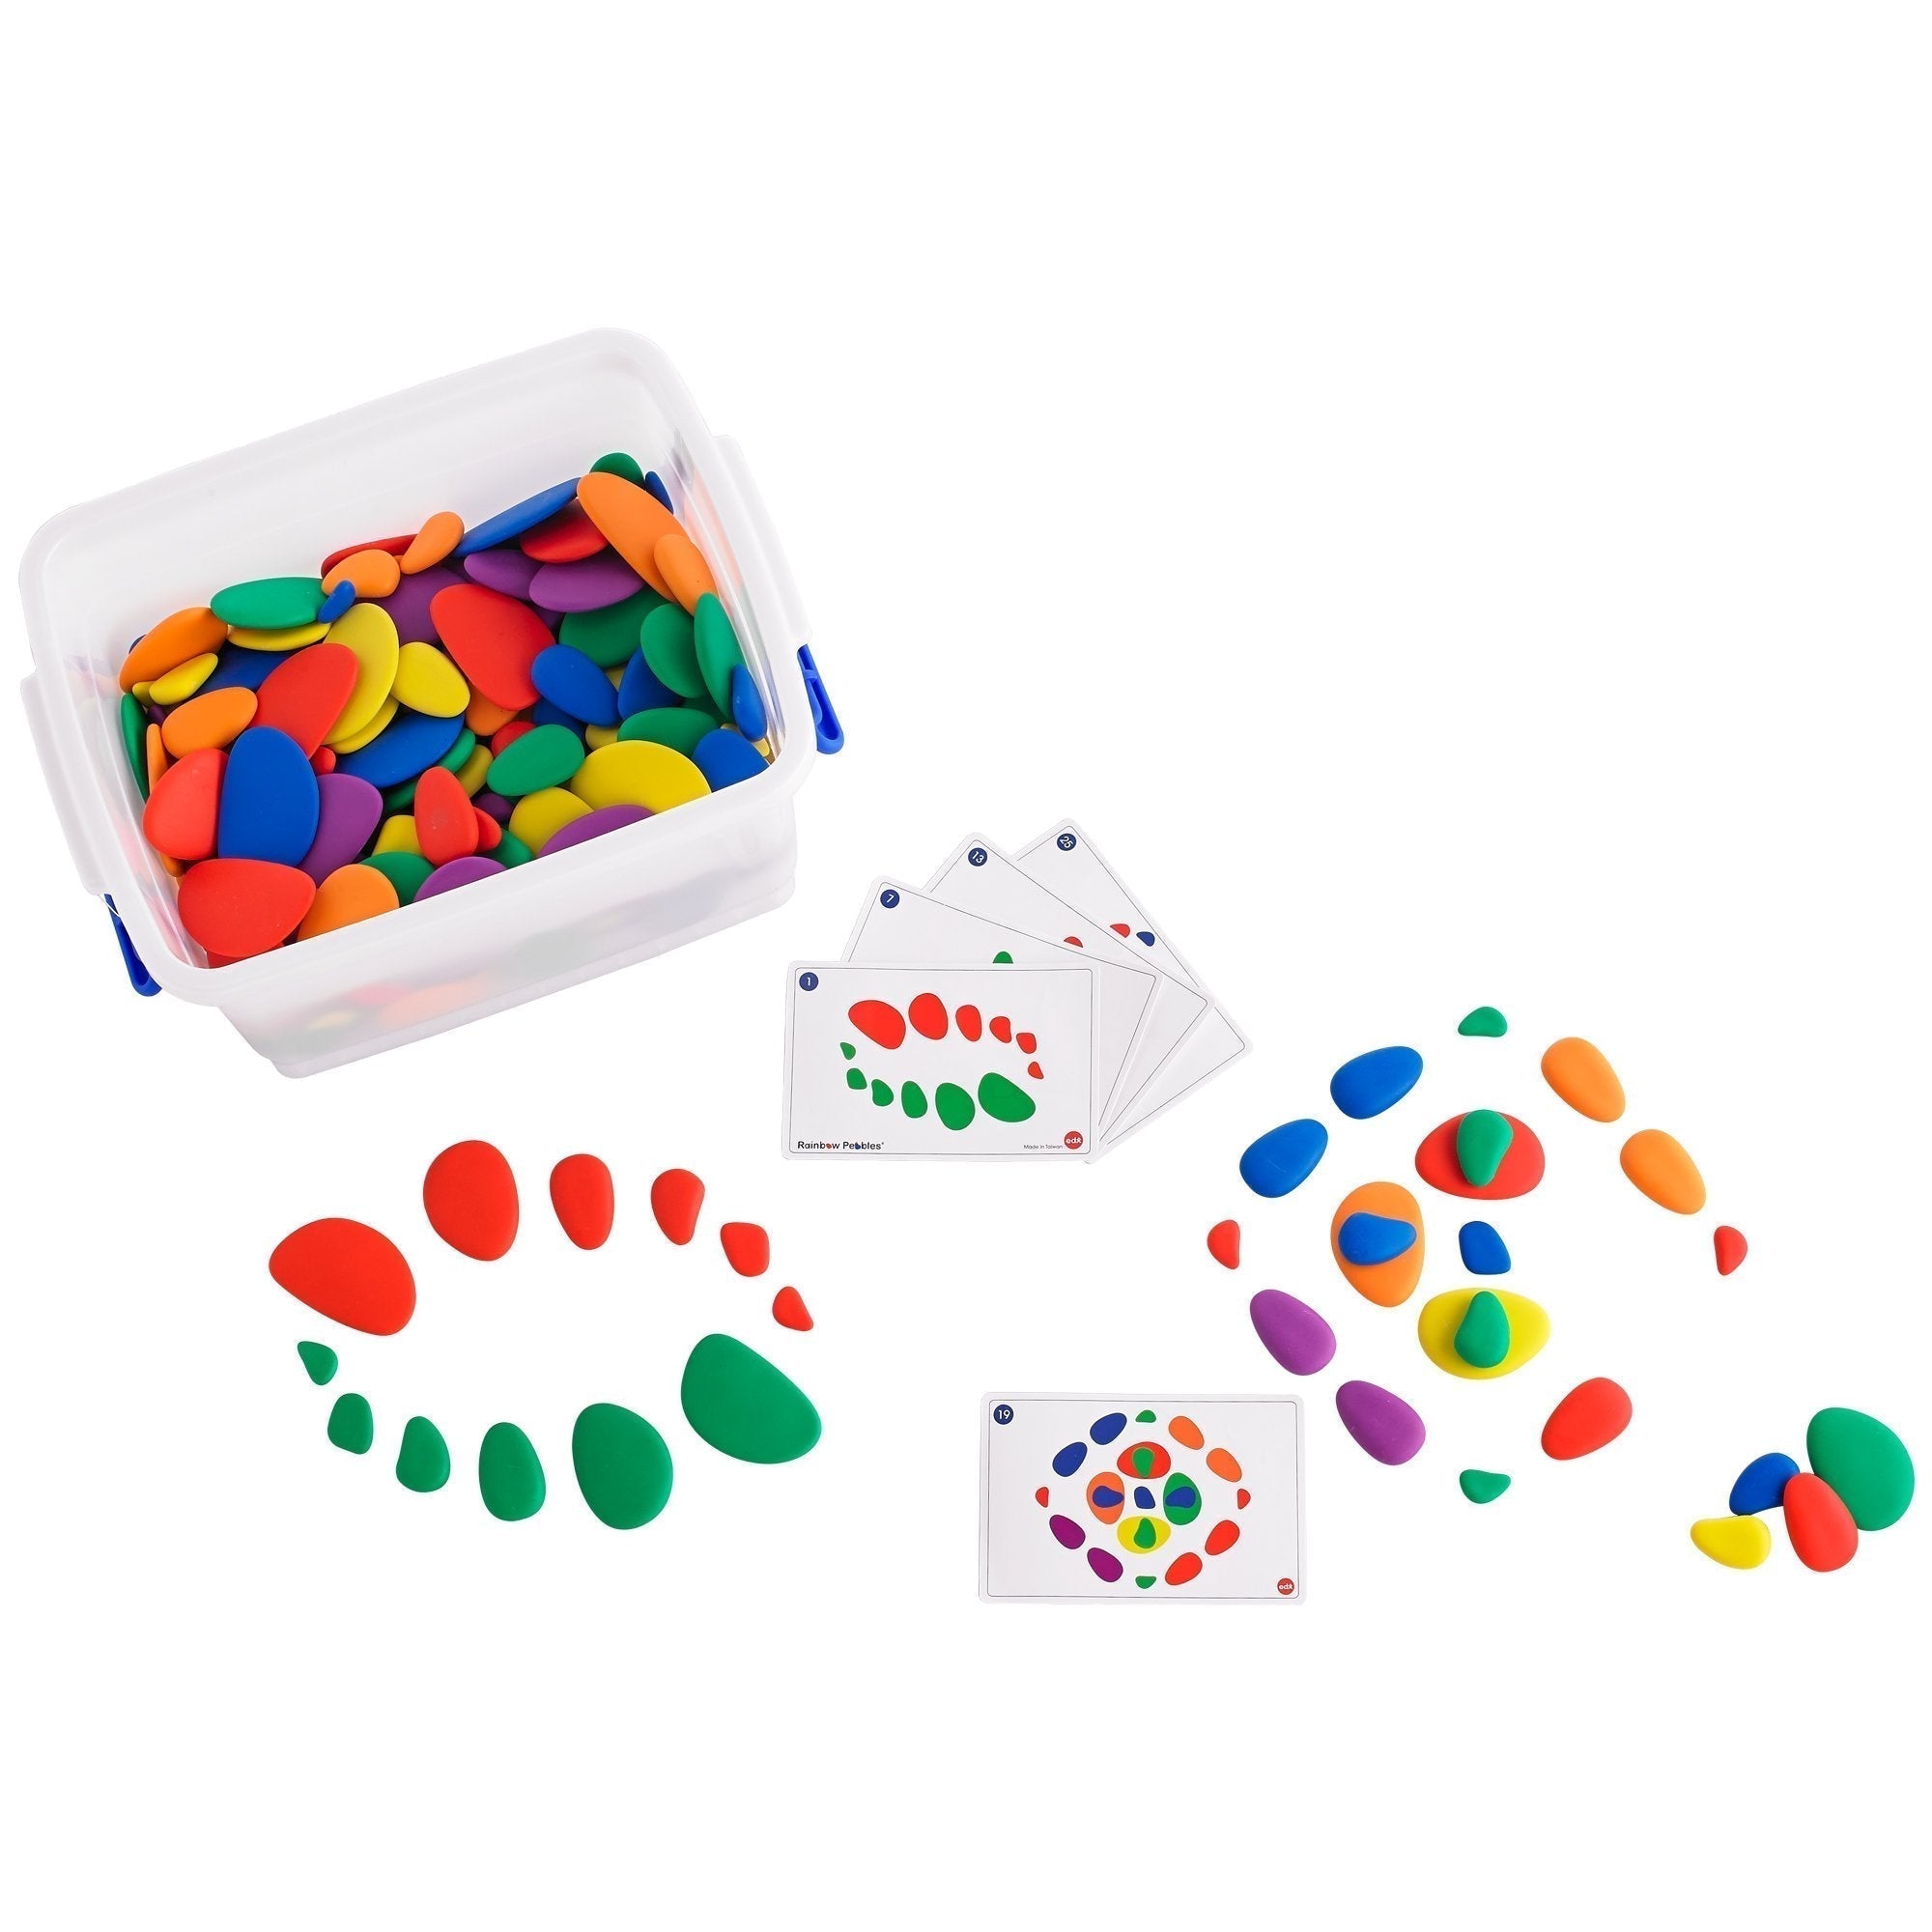 Rainbow Pebbles® Classroom Set, The edx education® Rainbow Pebbles® Classroom Set is fantastic for children to play, learn and get creative! These safe, smooth and tactile pebbles will spark your child's curiosity and encourage them to use their imagination to develop unique and interesting ways to incorporate them into play. Their odd shape makes them wobble when stacked, creating an extra challenge for young learners, and developing fine motor skills. Their rainbow colours and tangible texture make them i